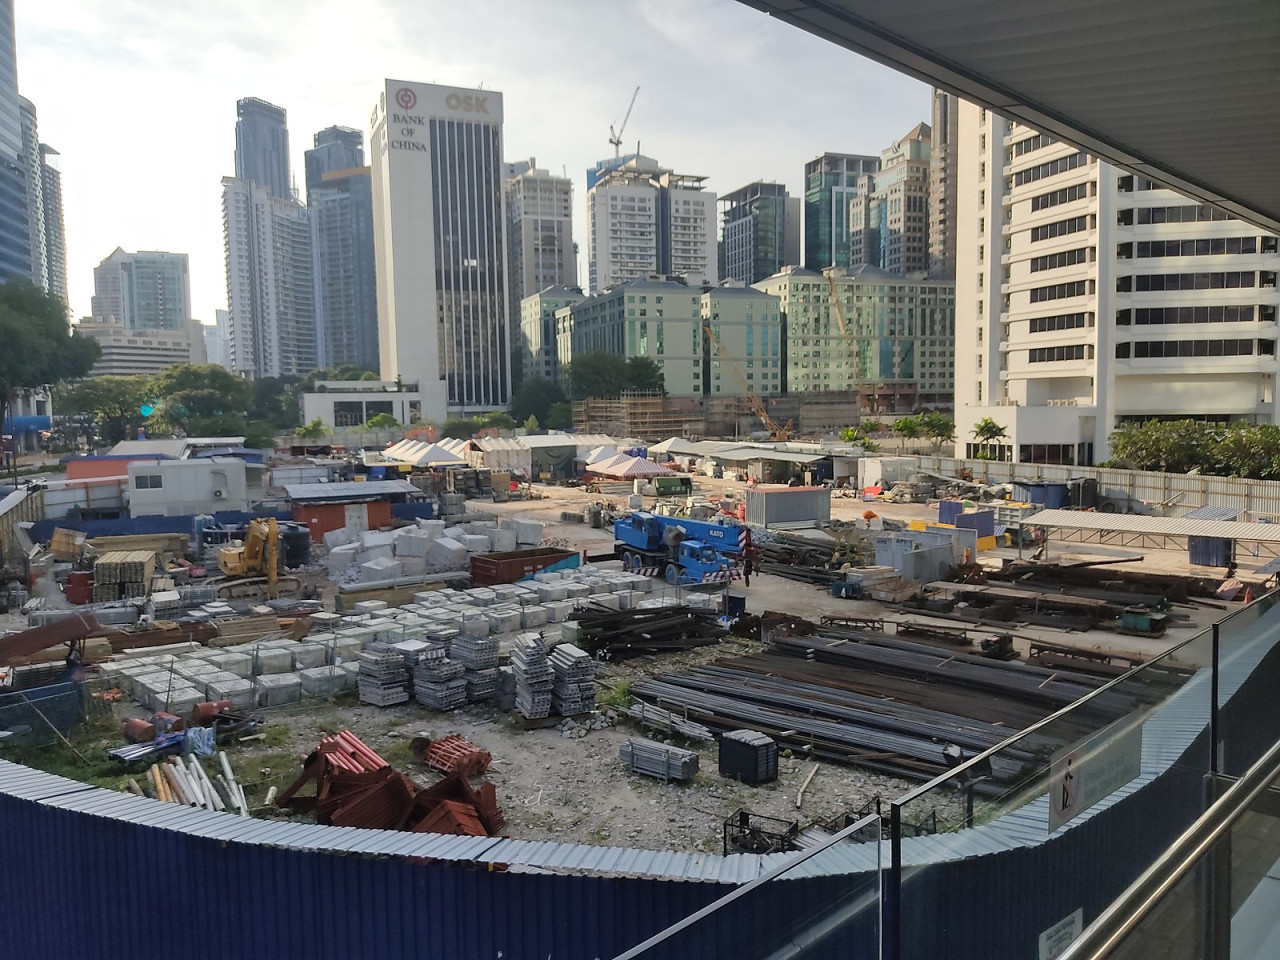 The mall site is now an MRT construction site seen here in 2021. – Wikimedia Commons pic